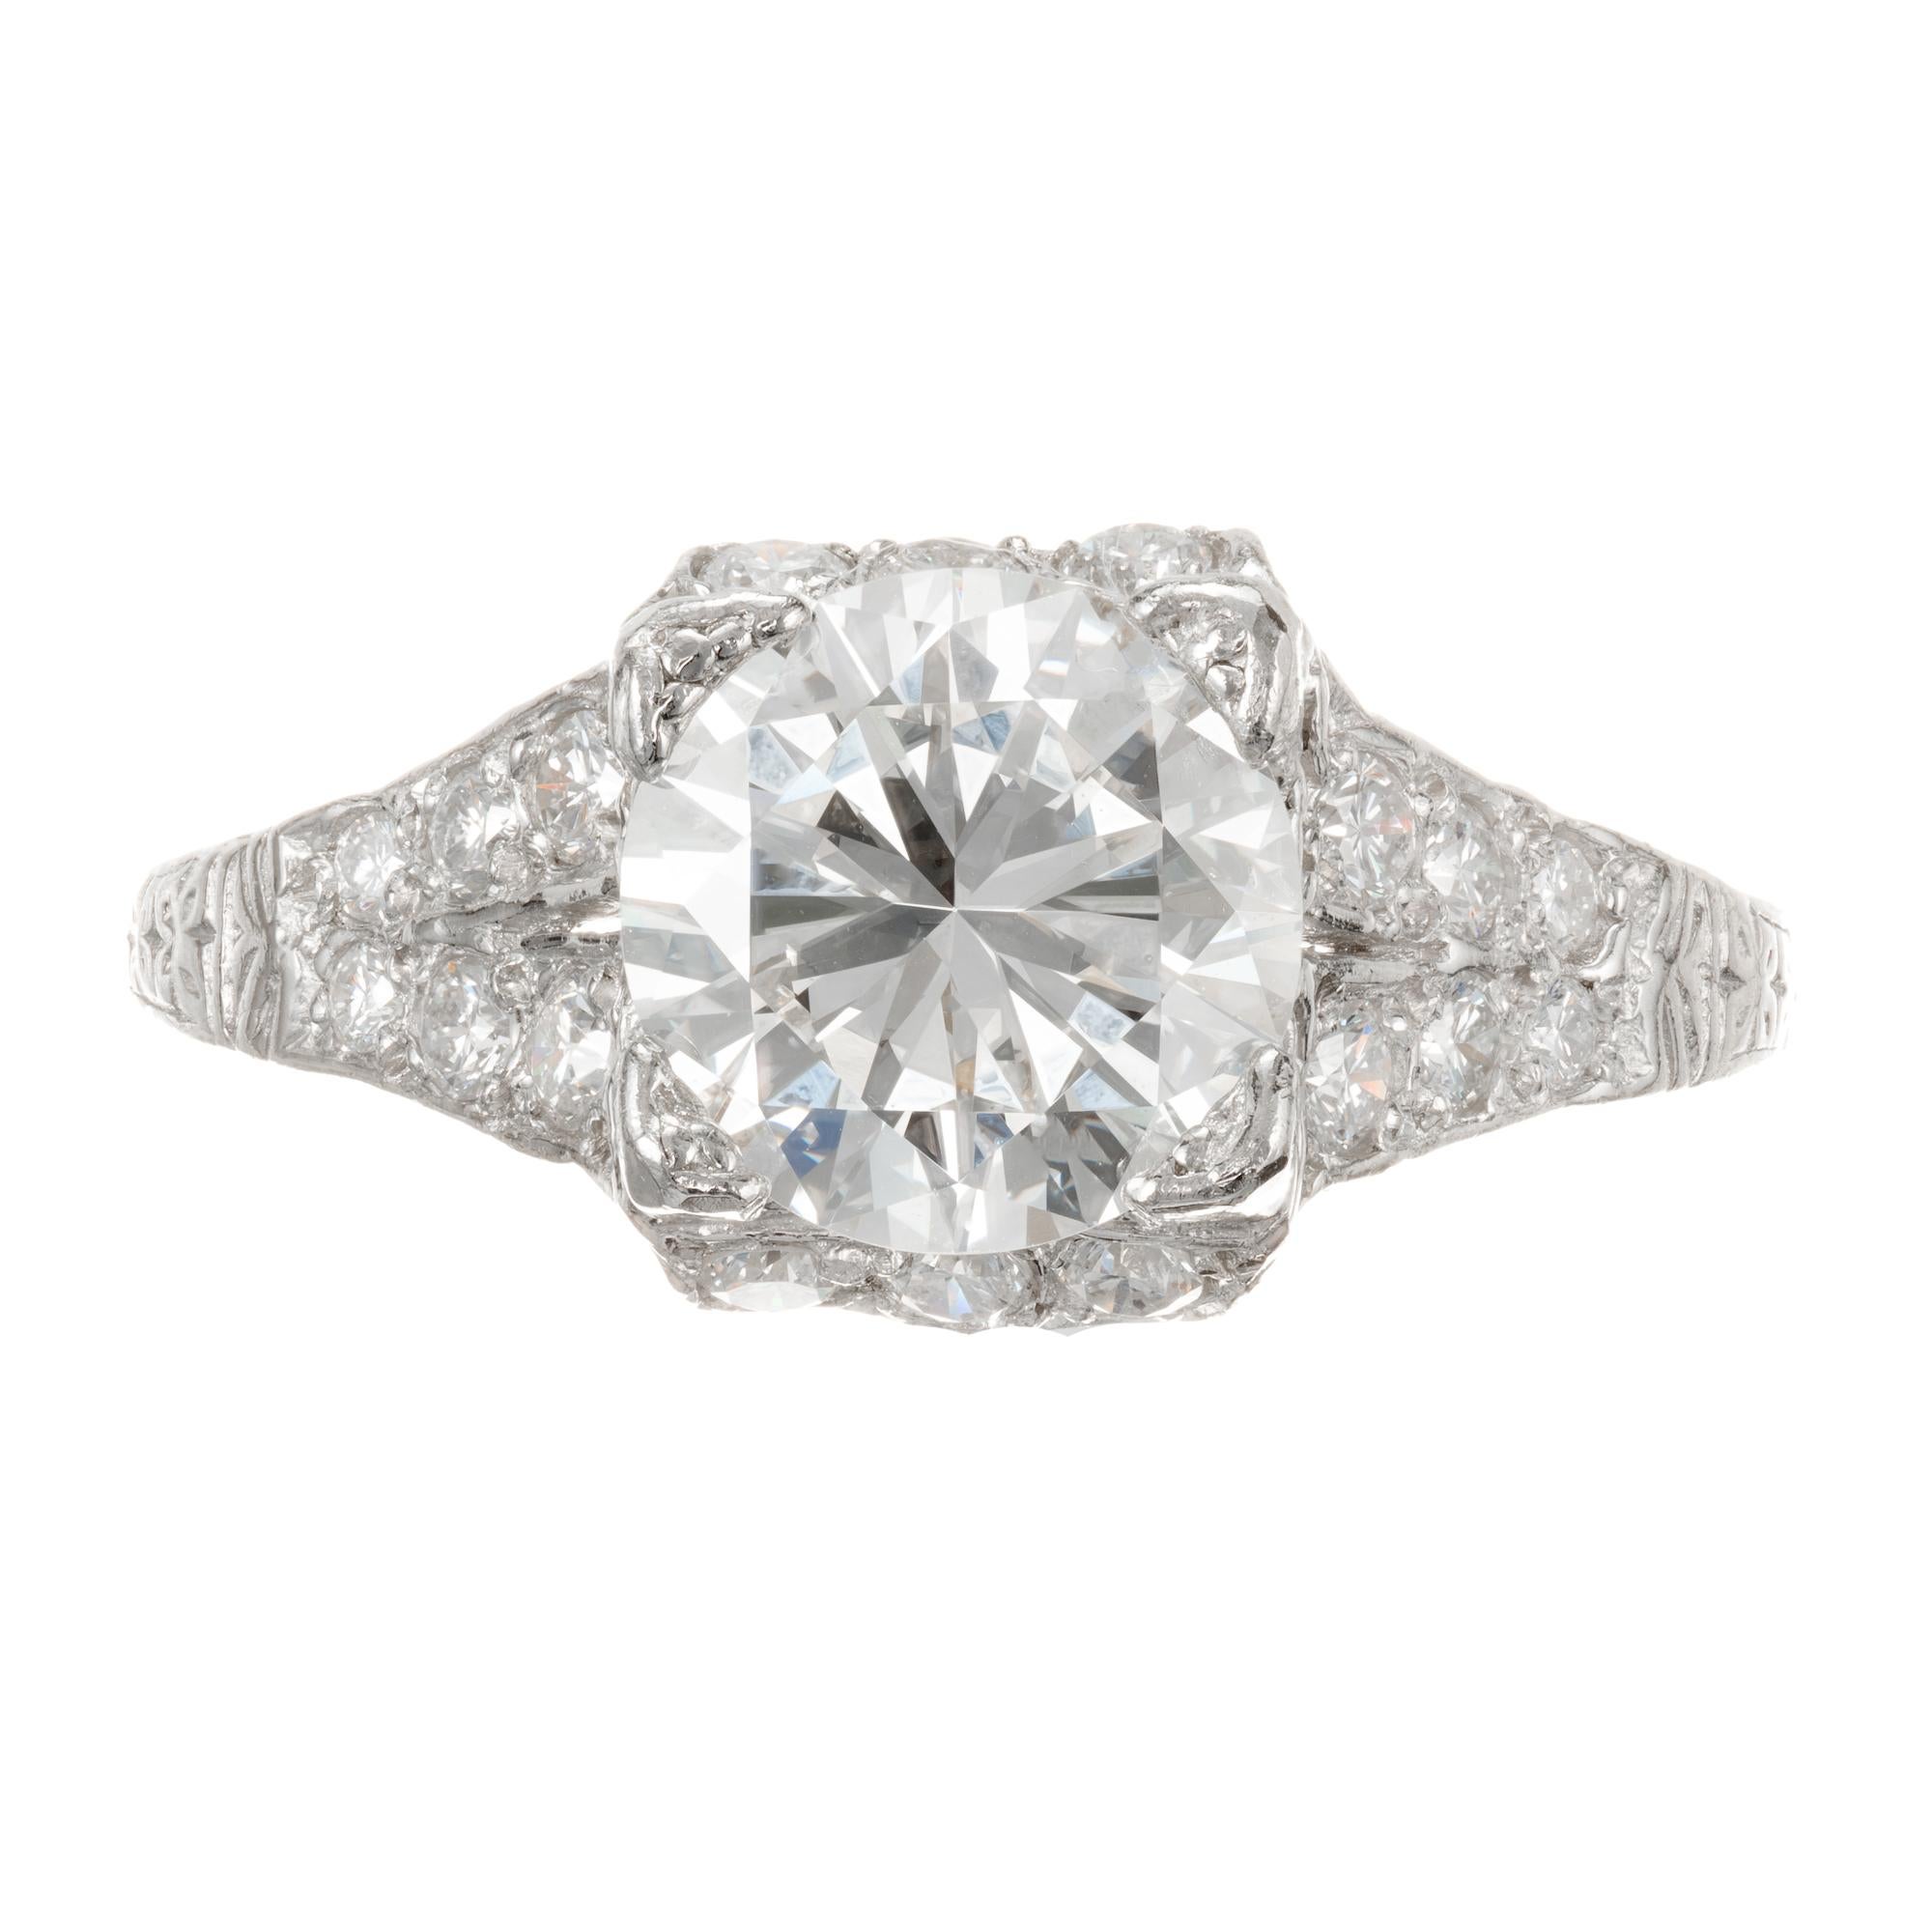 1.56ct Transitional round brilliant cut diamond engagement ring. EGL certified center stone in a platinum Art Deco setting. 

1.56 carat diamond approx total weight 1.56ct  F - G, VS1  round brilliant cut 7.43-7.40 x 4.67mm EGL certified